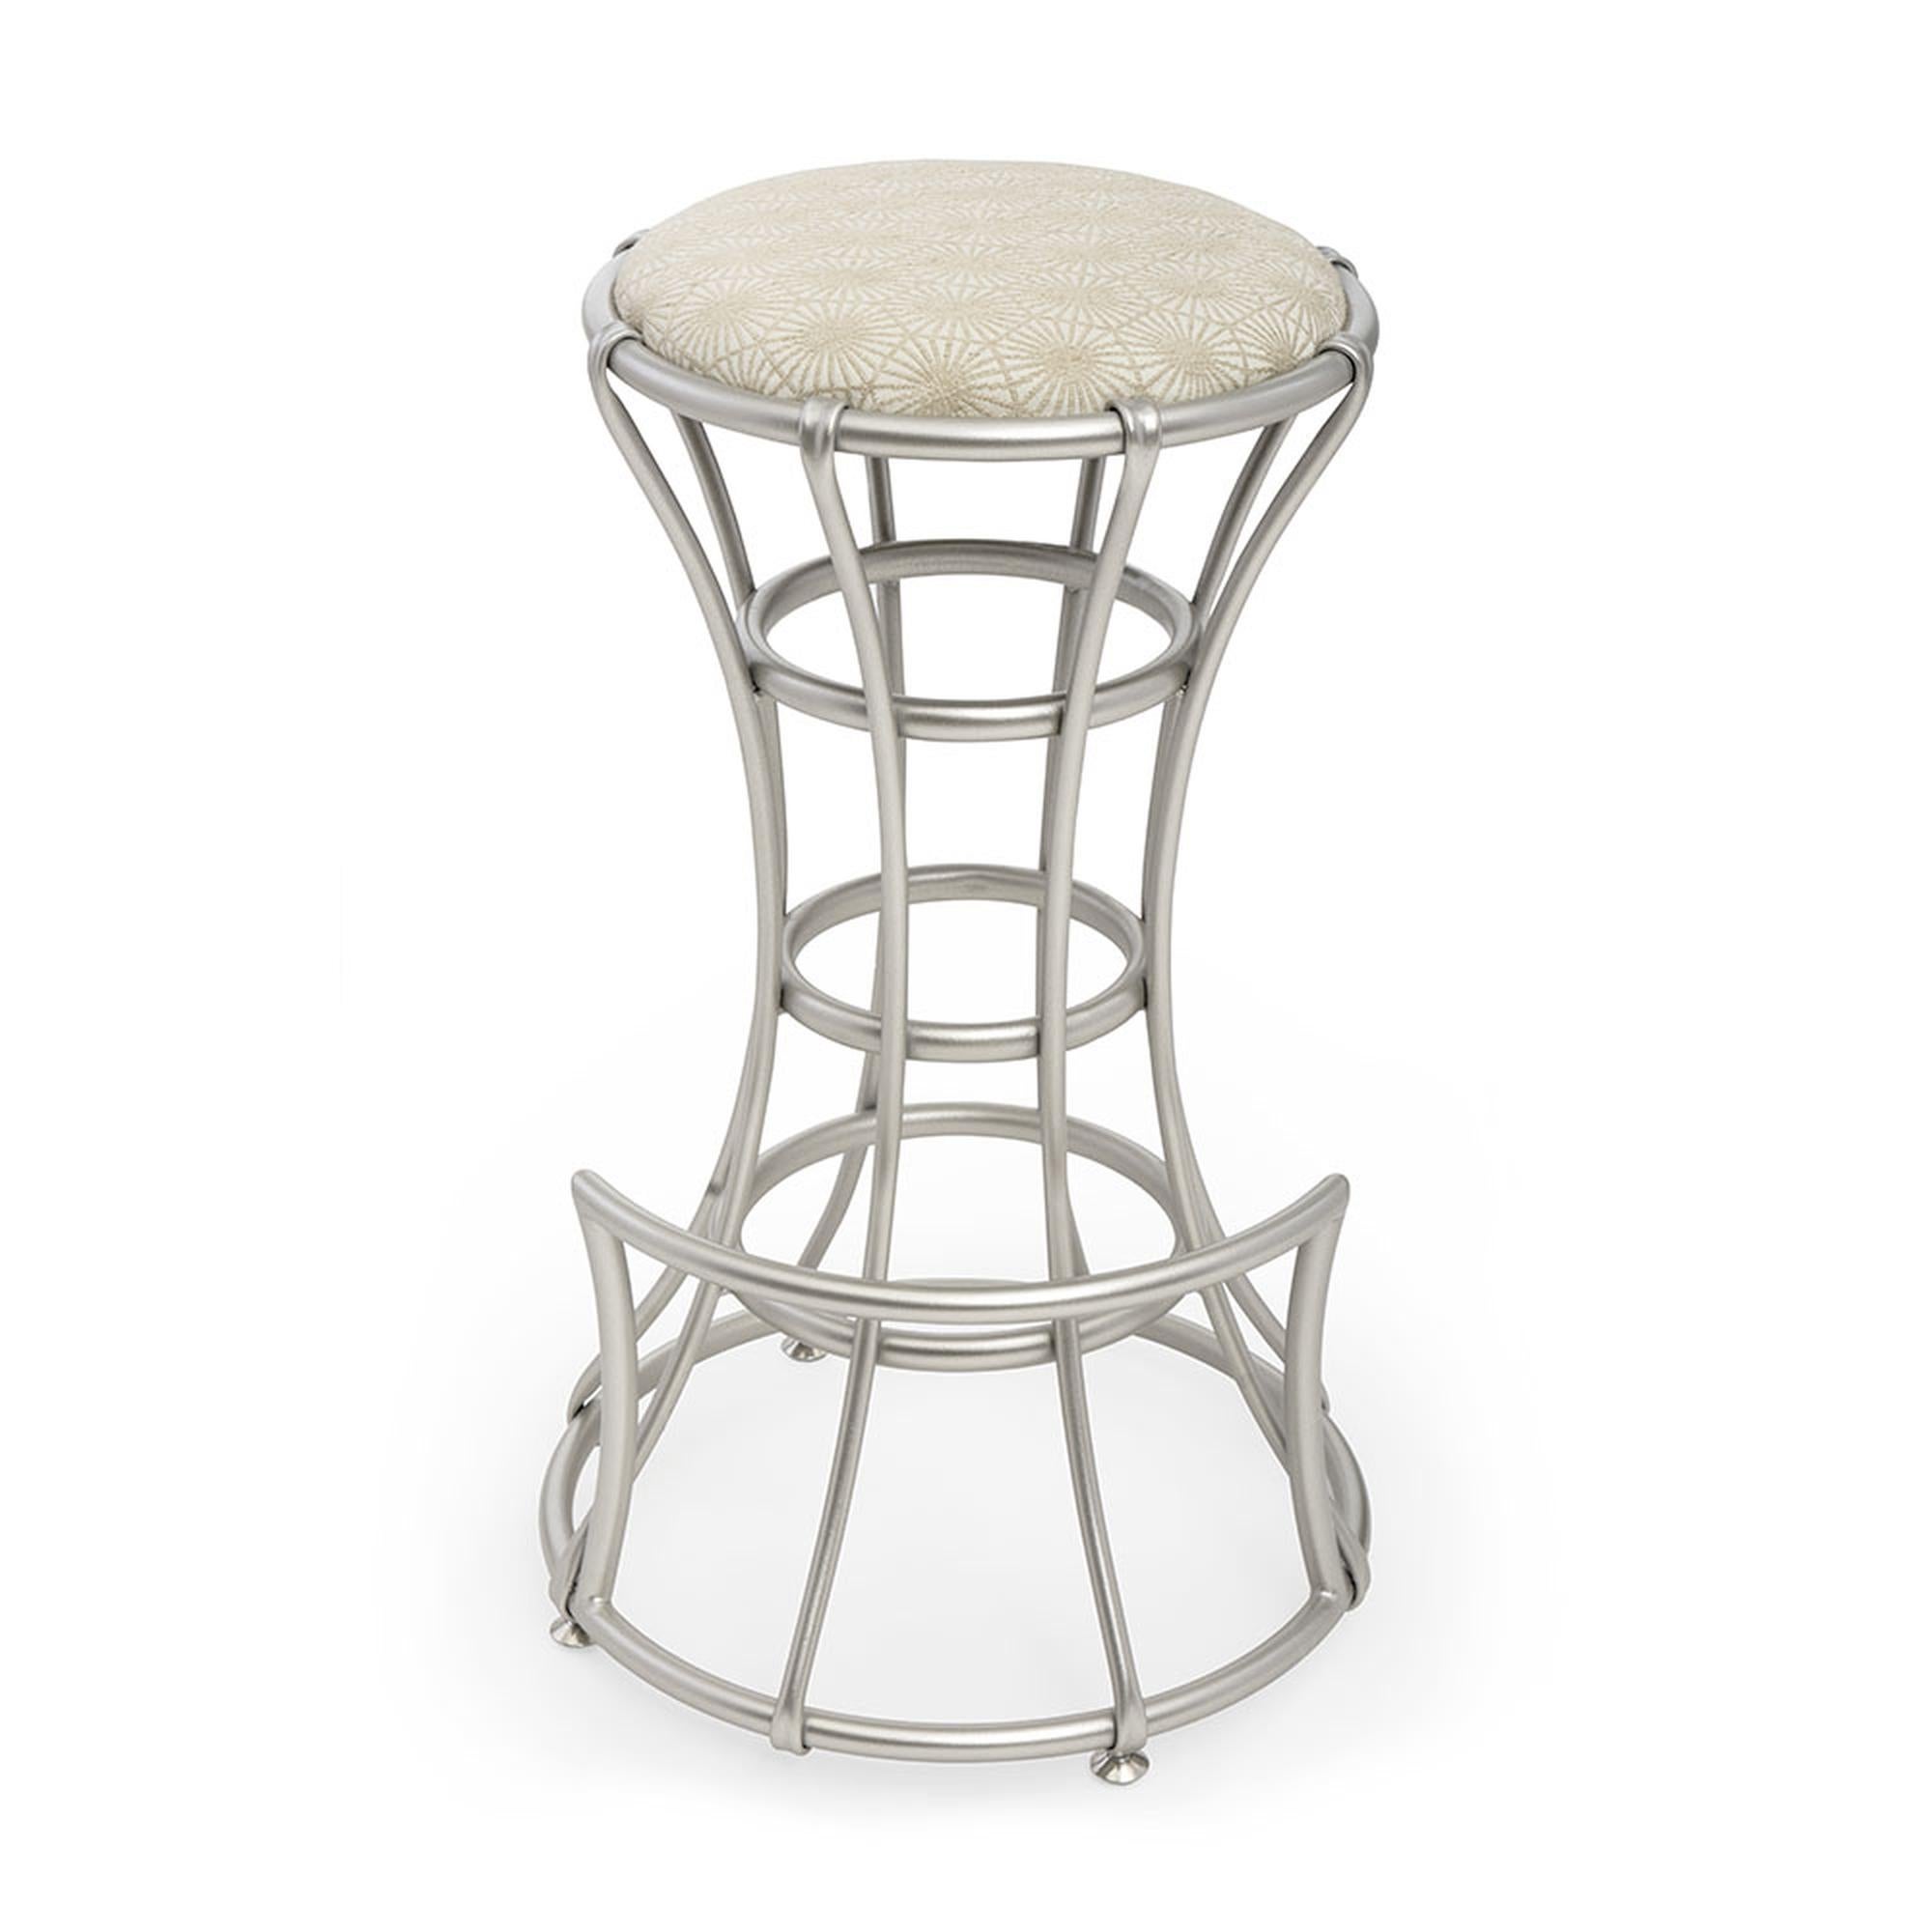 With an unlikely arrangement of feminine and industrial elements, the Palisades bar stool is a gorgeous piece unlike any other. The curved metal base was inspired by the bodice of an antique dress form, and is accented with inner support rings